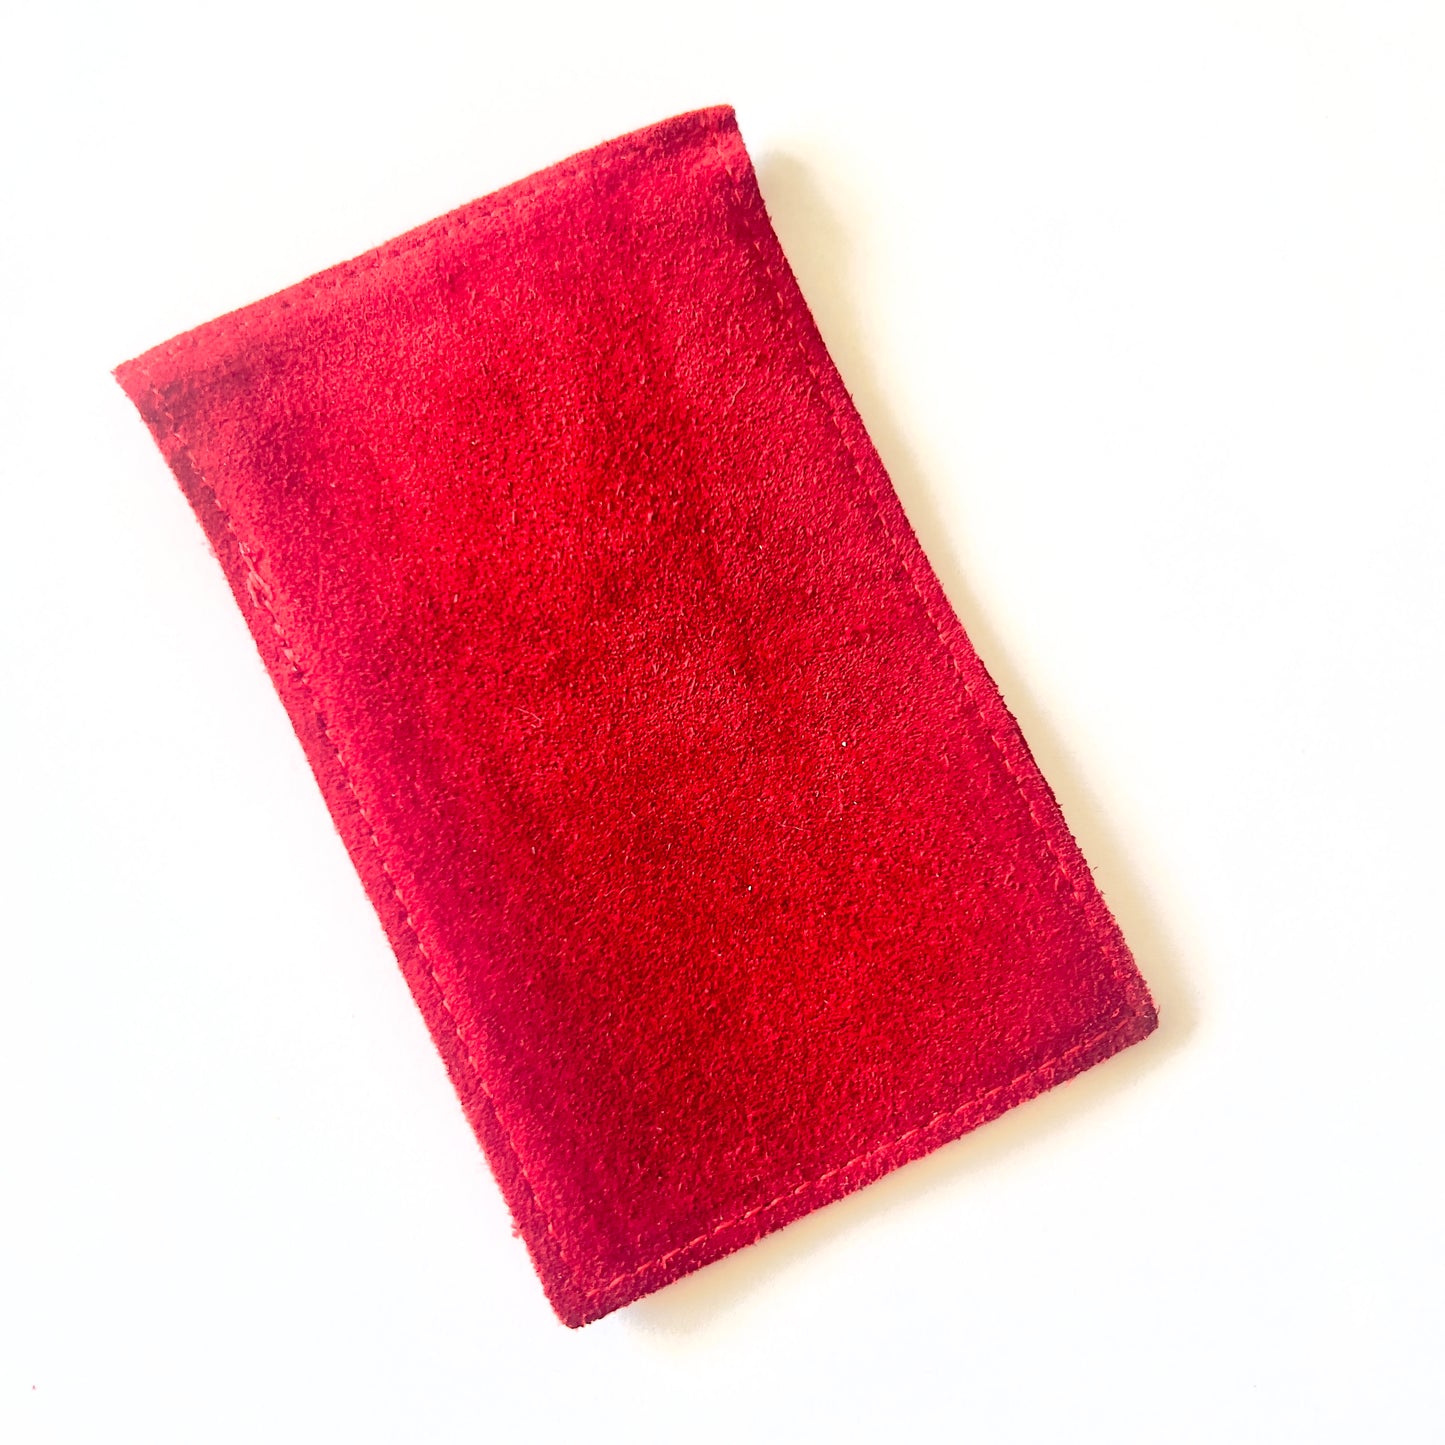 CARTIER Genuine Red Leather Jewelry Pouch 2.25 x 4 inches